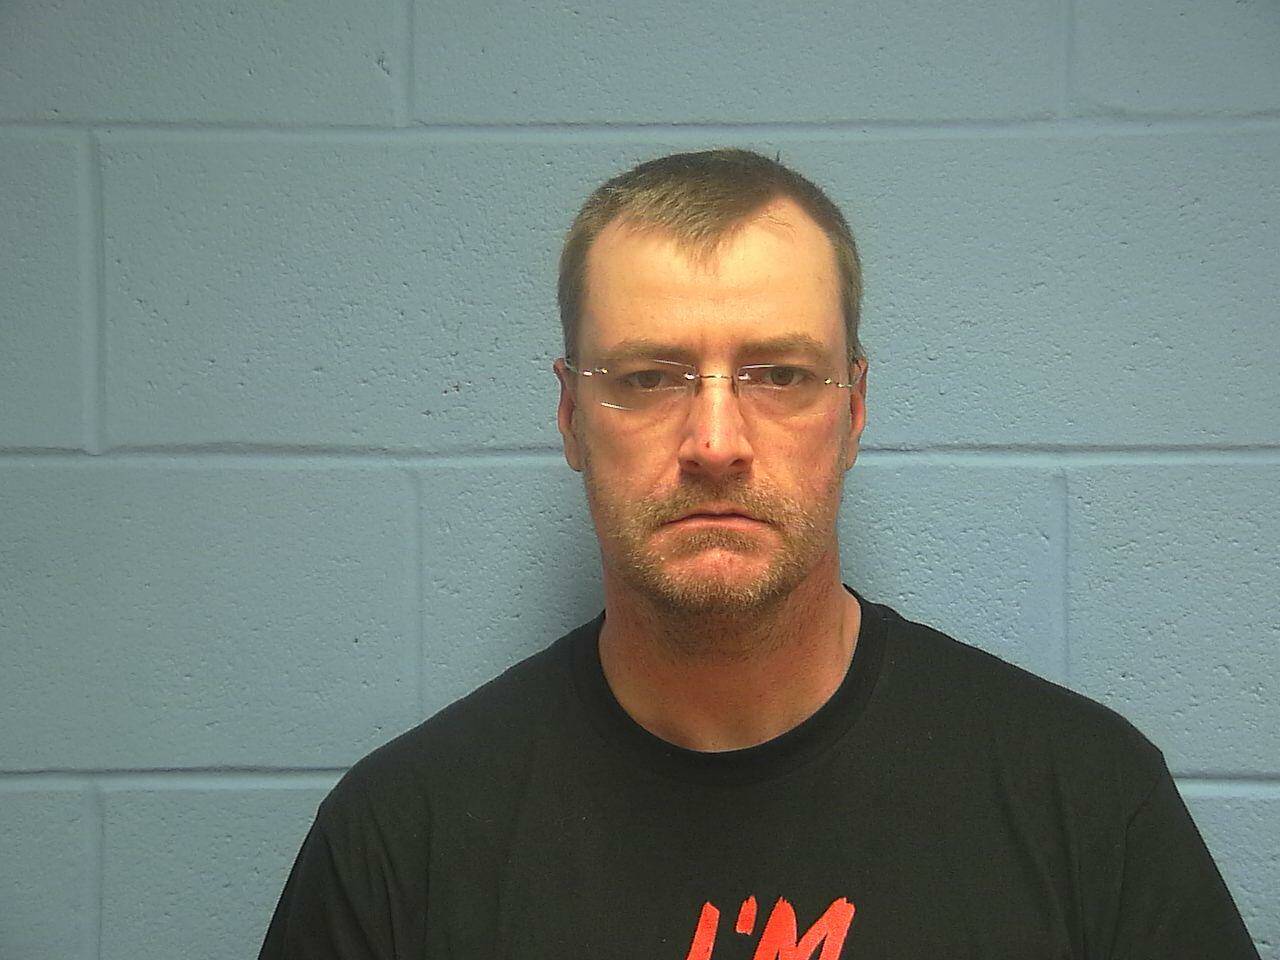 Michael B. D’Haene is pictured in photo from the sheriff’s office.